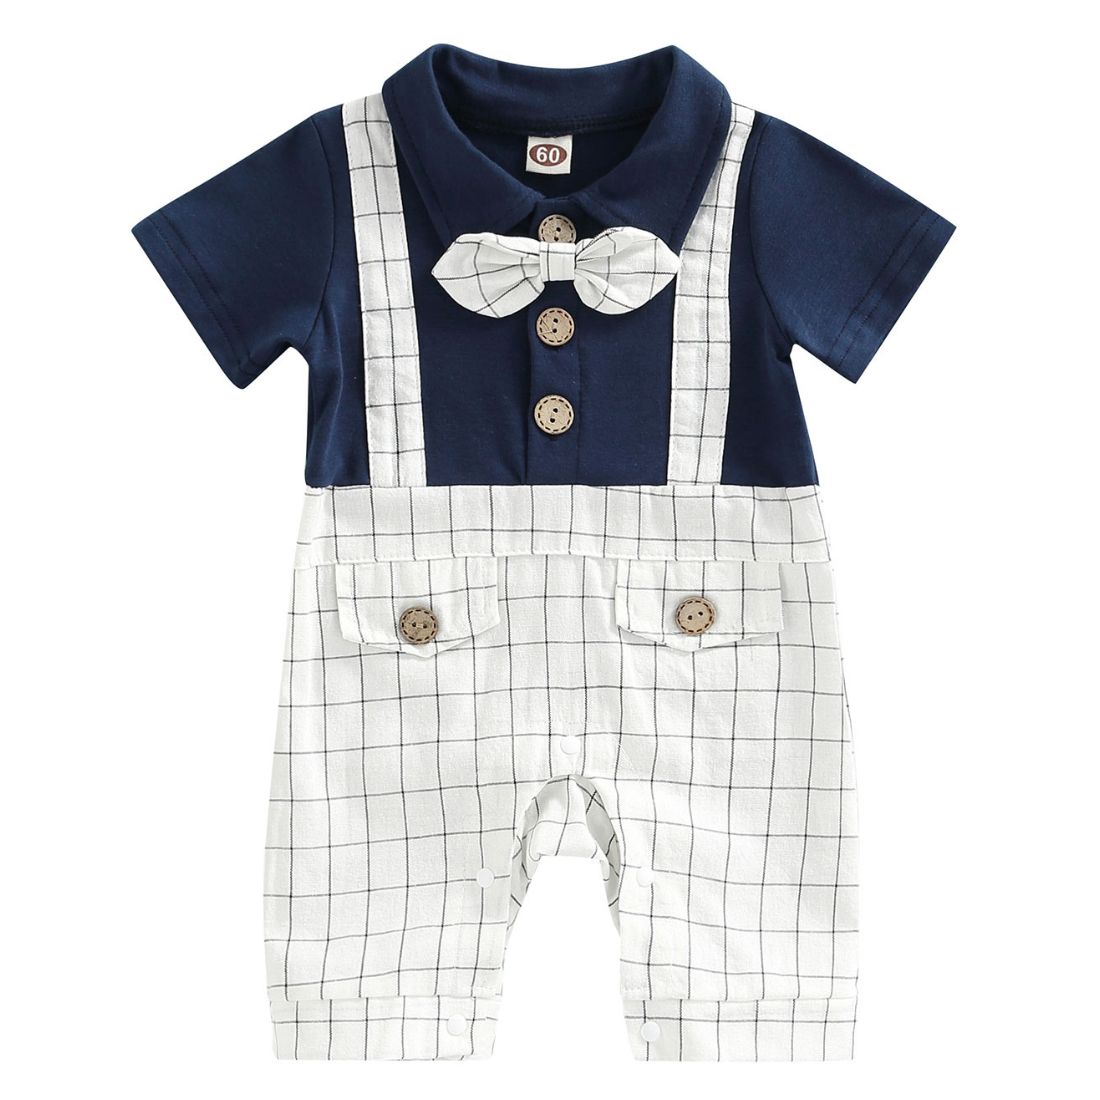 Buy Trendy and Afforable Baby Bodysuits @ My Trendy Youngsters - Dress your Mini in Style @ My Trendy Youngsters Buy Trendy and Afforable Baby Bodysuits @ My Trendy Youngsters - Dress your Mini in Style @ My Trendy Youngsters 